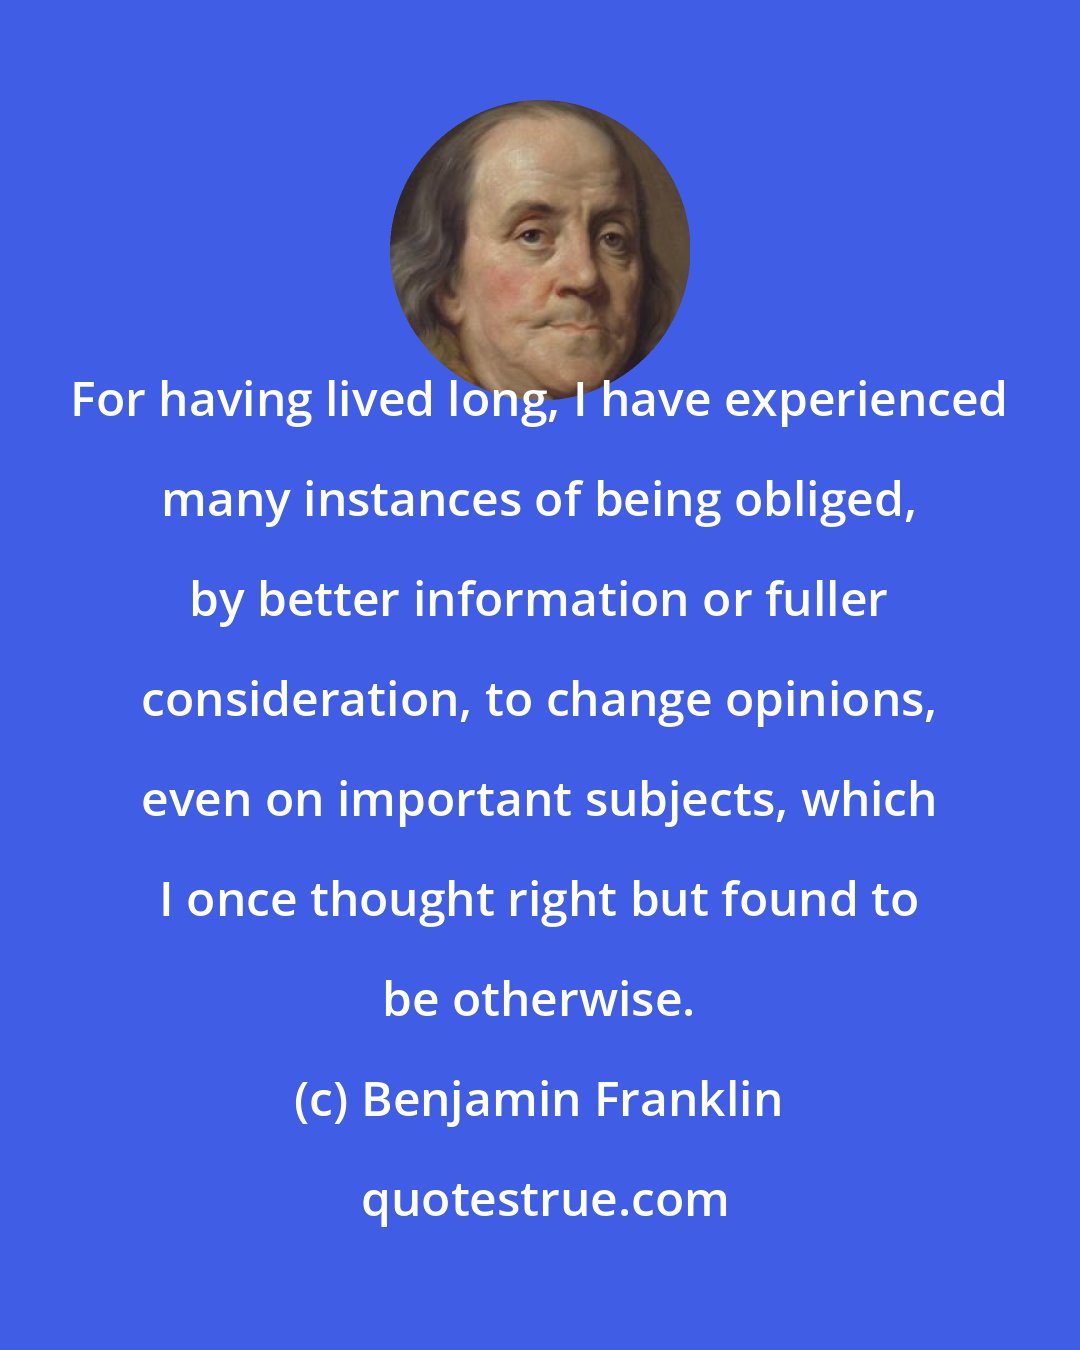 Benjamin Franklin: For having lived long, I have experienced many instances of being obliged, by better information or fuller consideration, to change opinions, even on important subjects, which I once thought right but found to be otherwise.